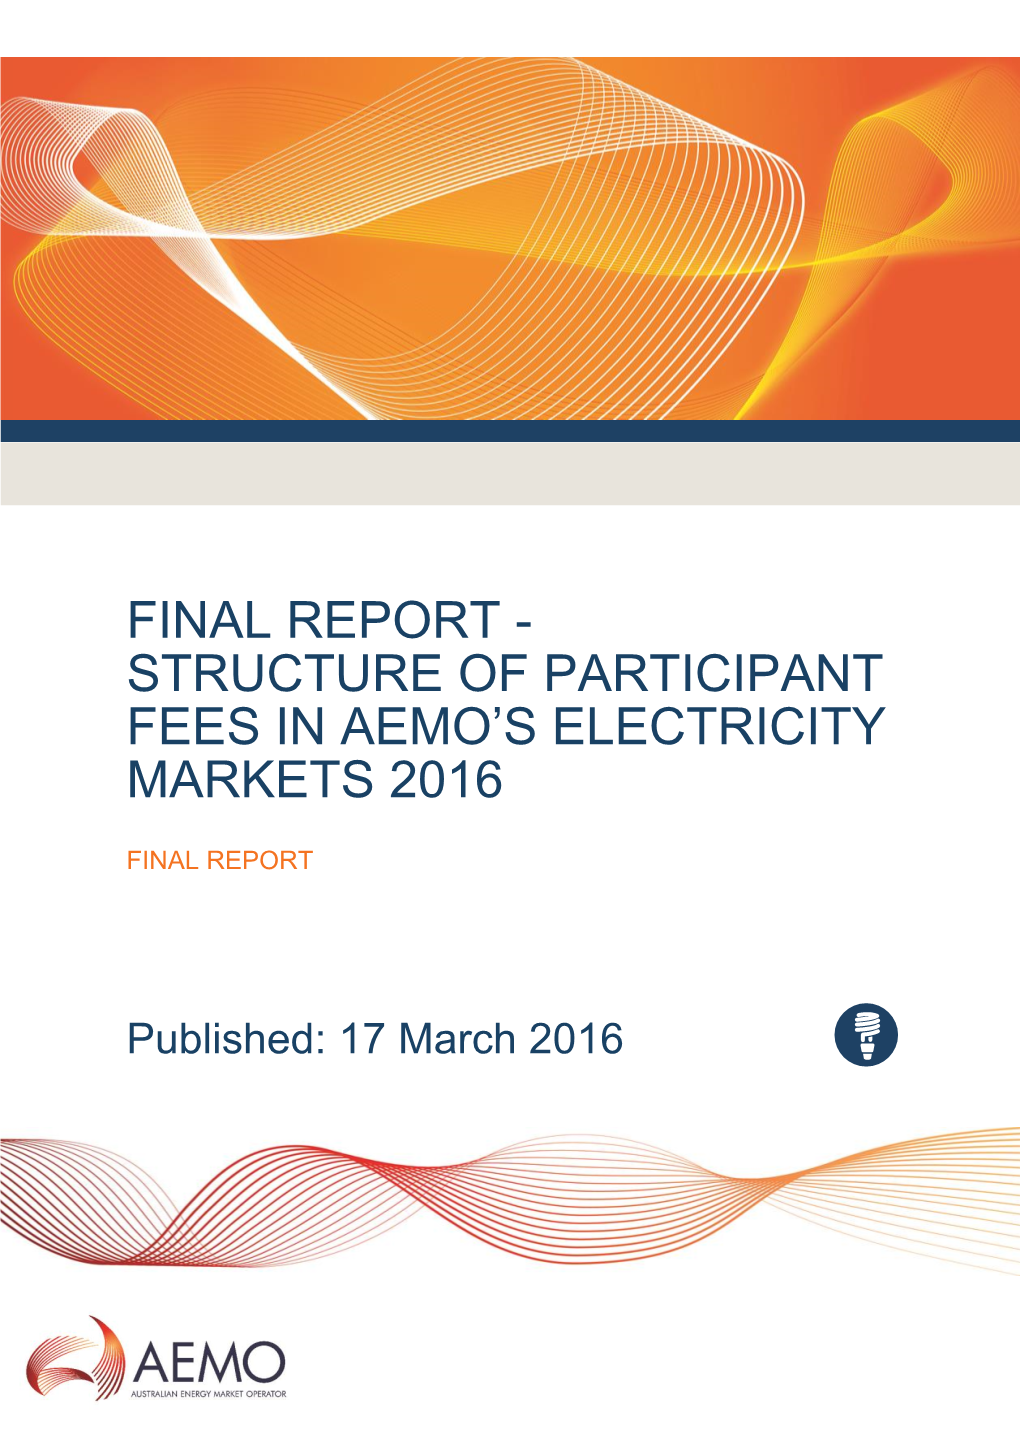 Structure of Participant Fees in AEMO's Electricity Markets 2016